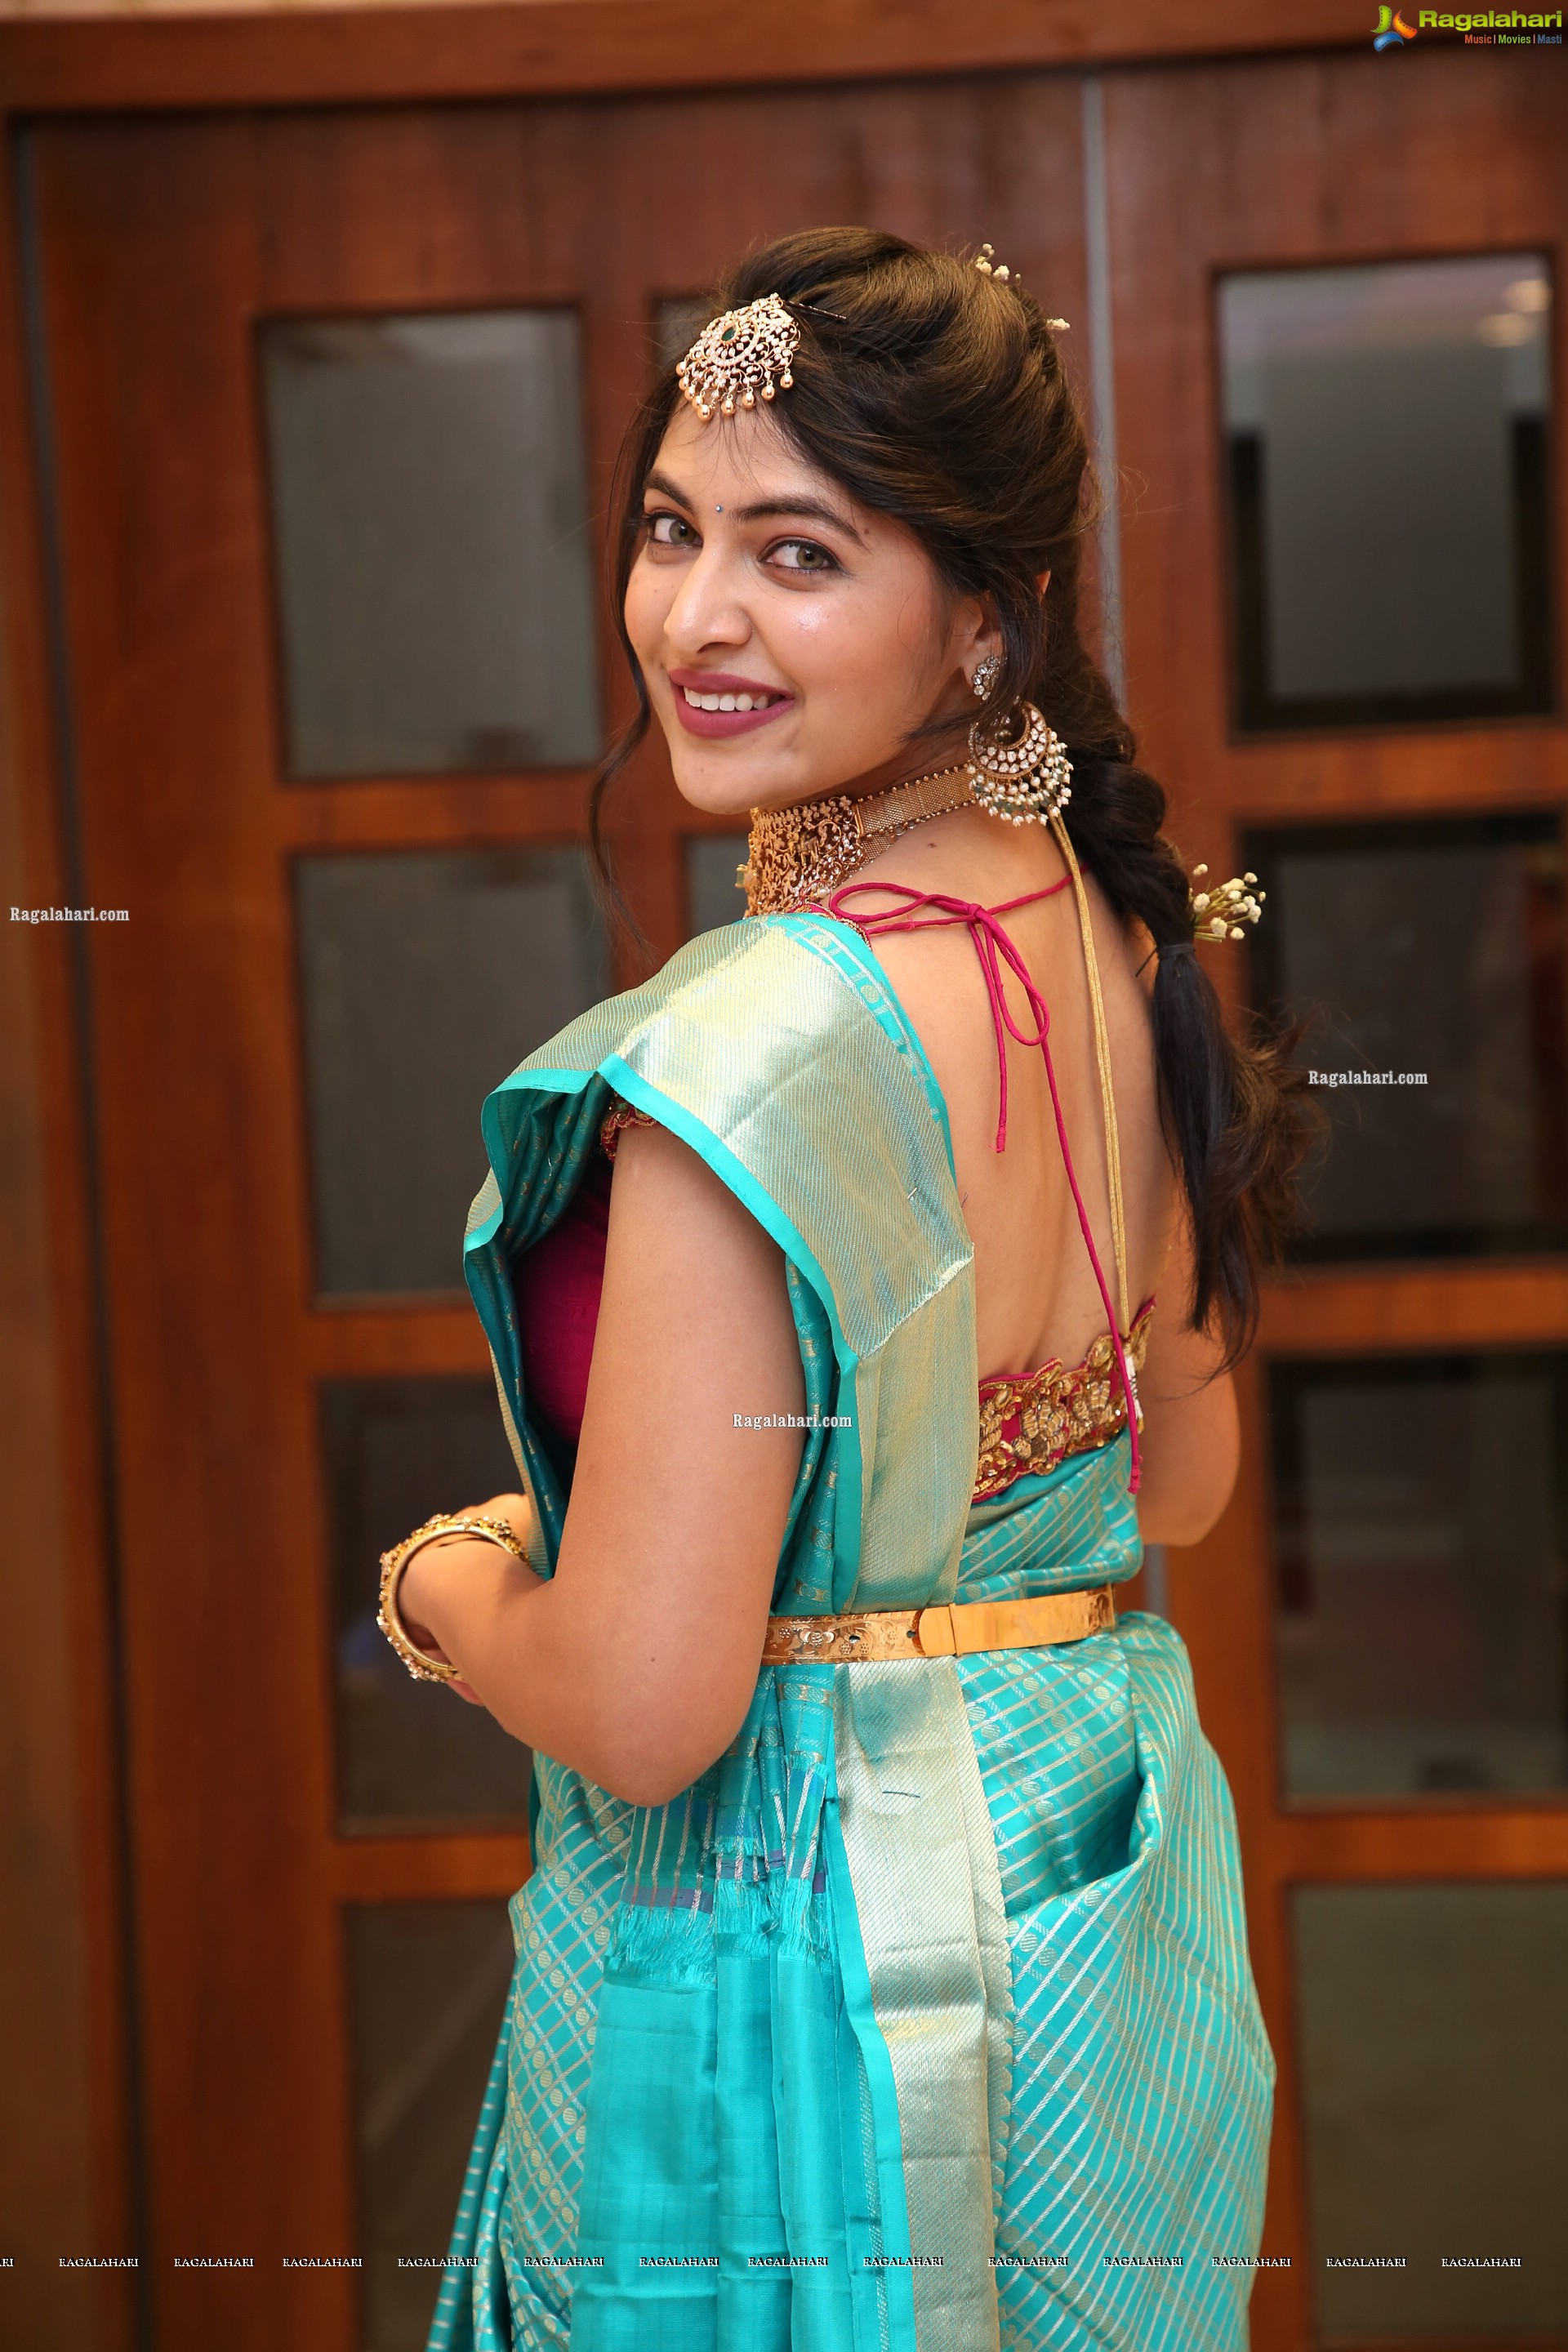 Supraja Reddy Poses With Gold Jewellery, HD Photo Gallery